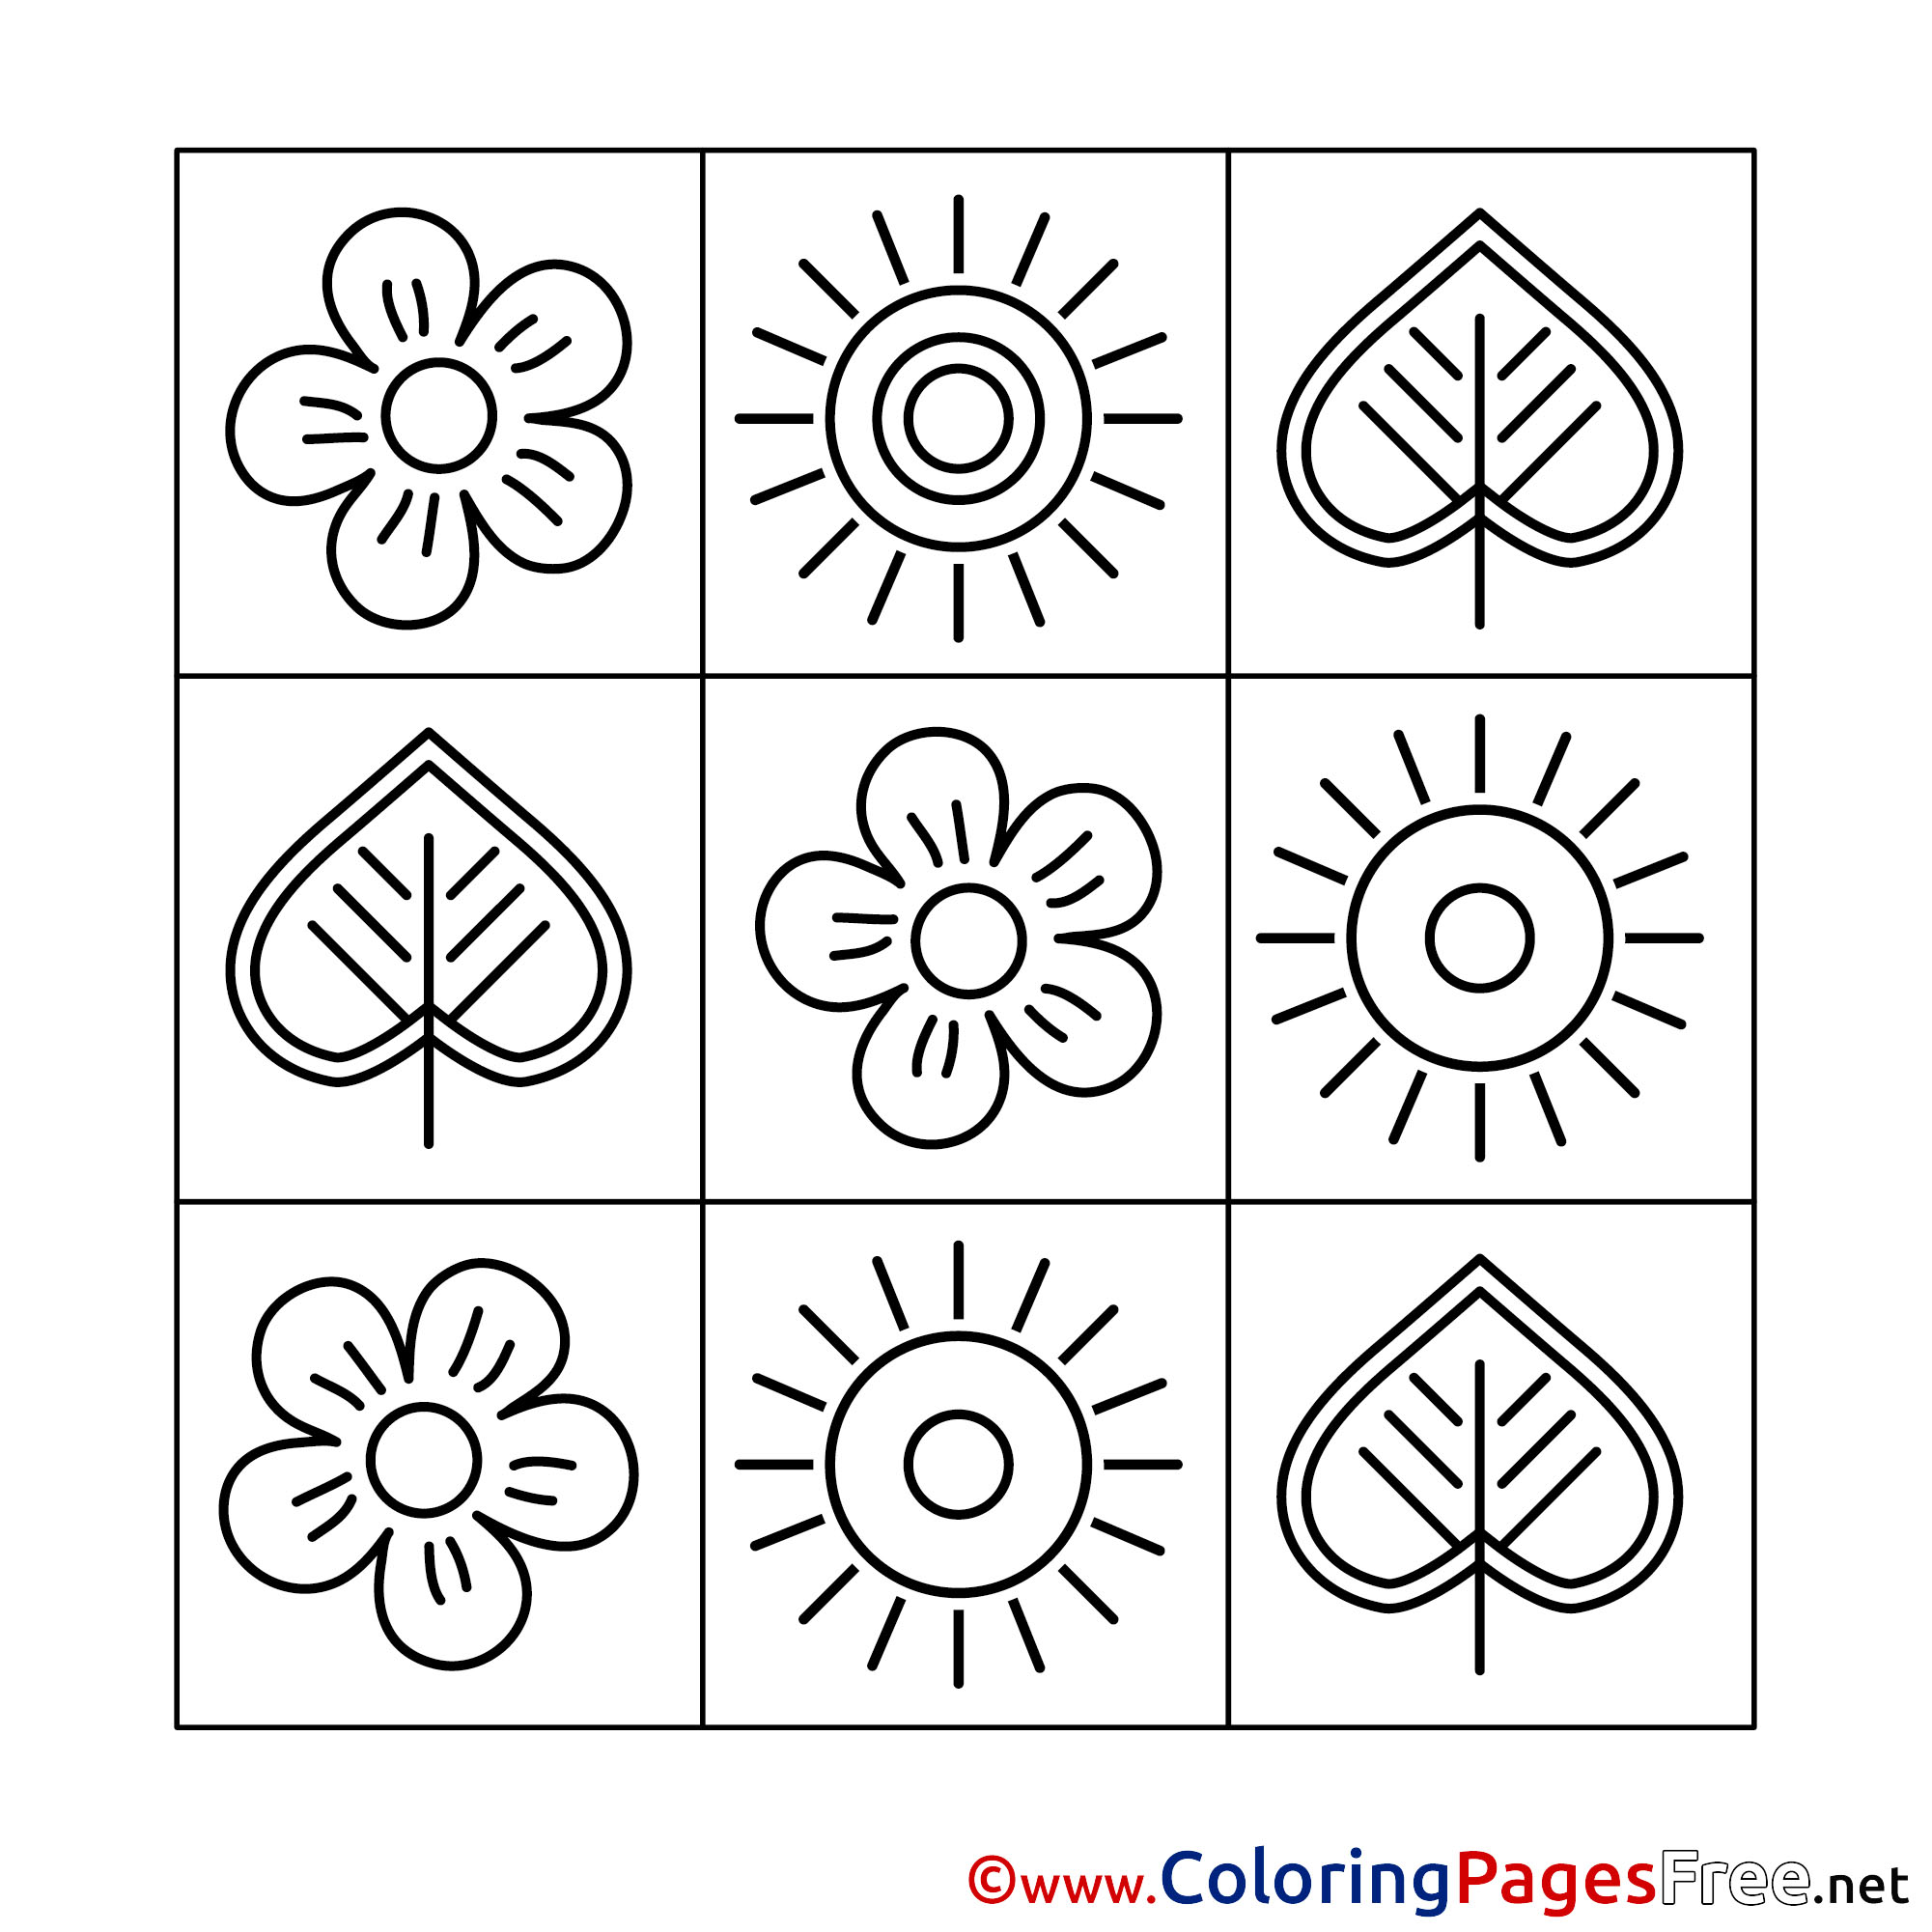 decoration-free-colouring-page-spring